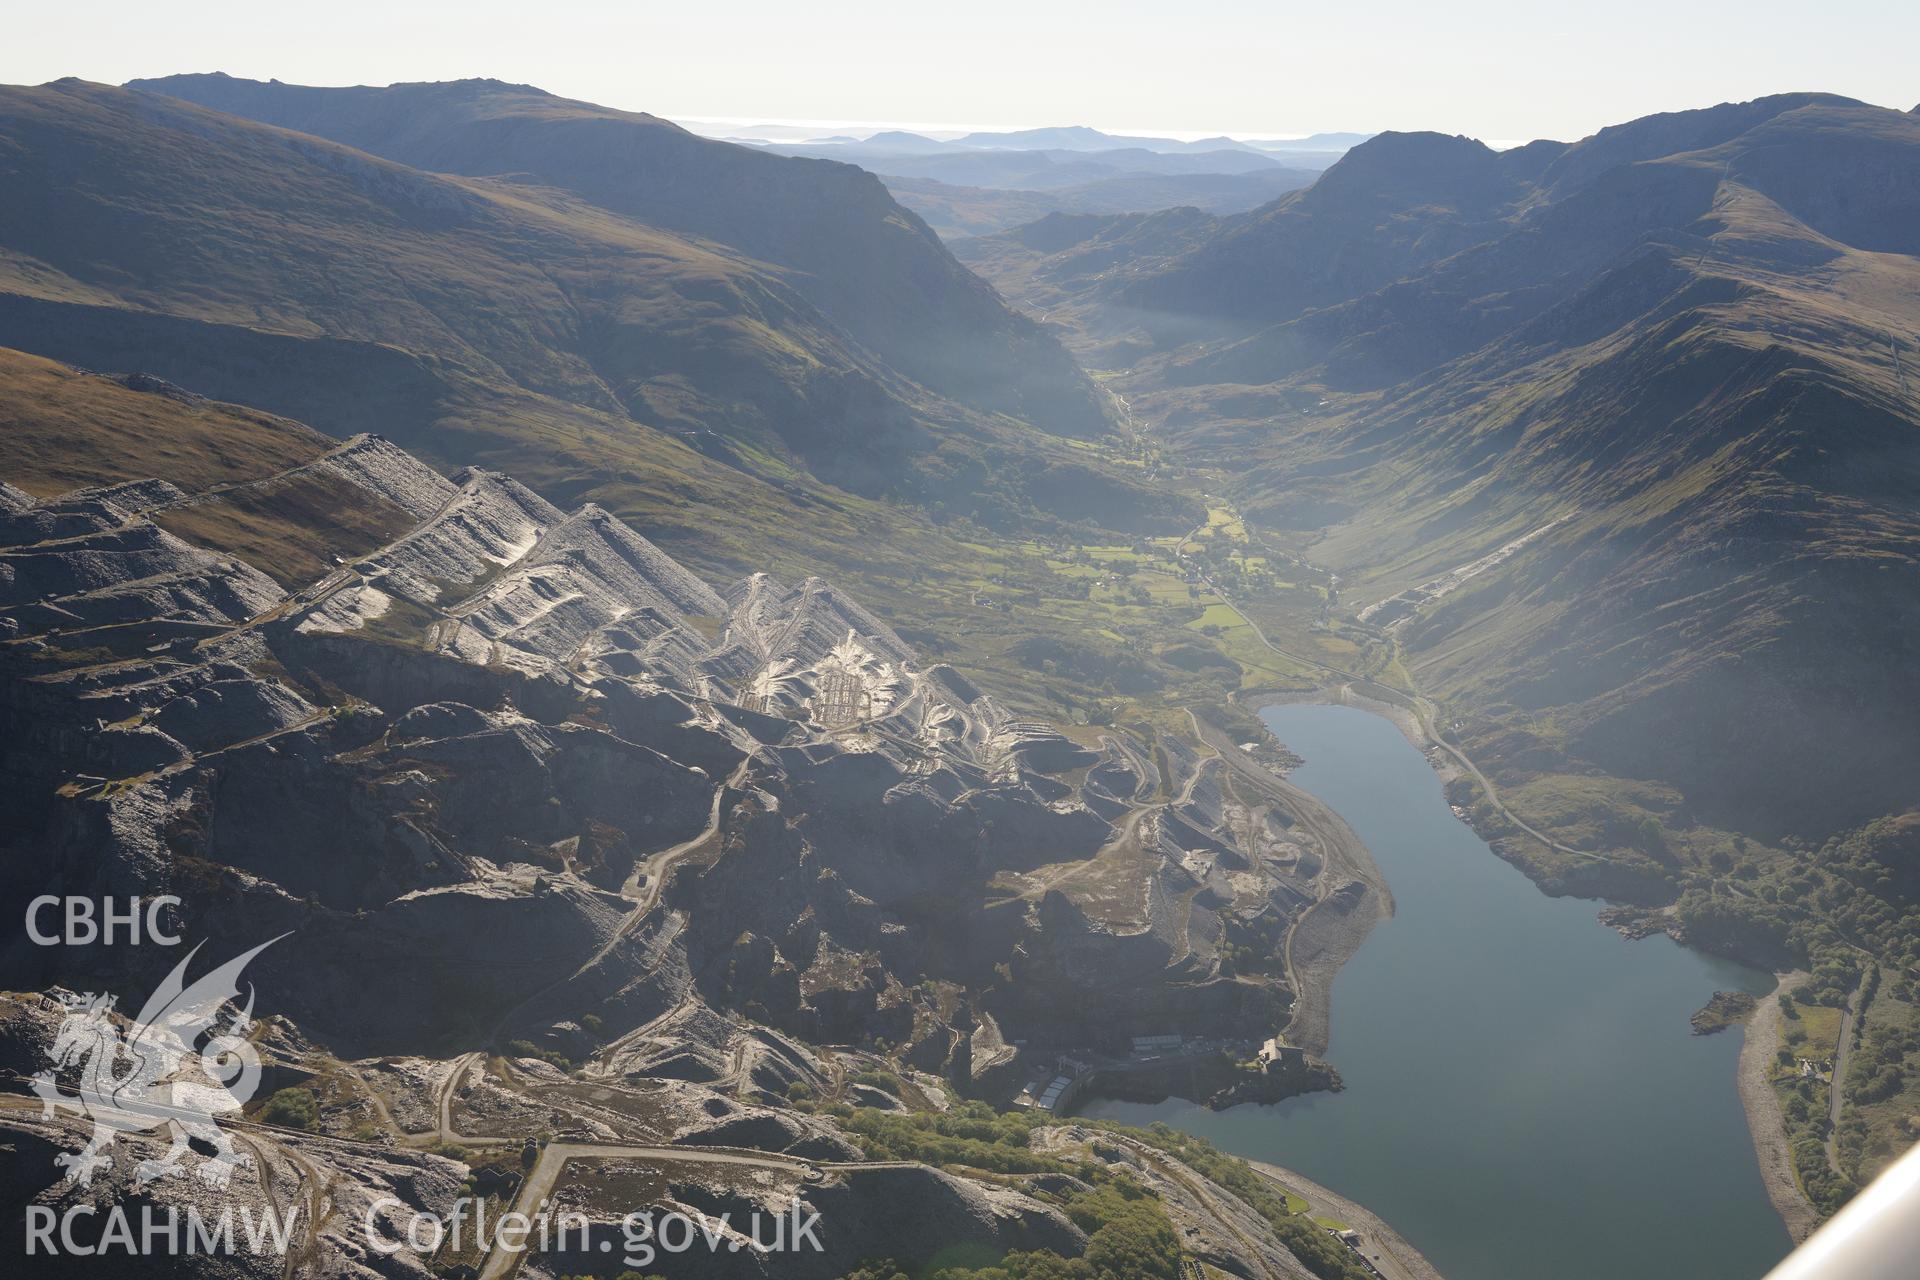 Dinorwig slate quarry and 'Electric Mountain' pumped-storage hydro-electric power station, near Llanberis. Oblique aerial photograph taken during the Royal Commission's programme of archaeological aerial reconnaissance by Toby Driver on 2nd October 2015.